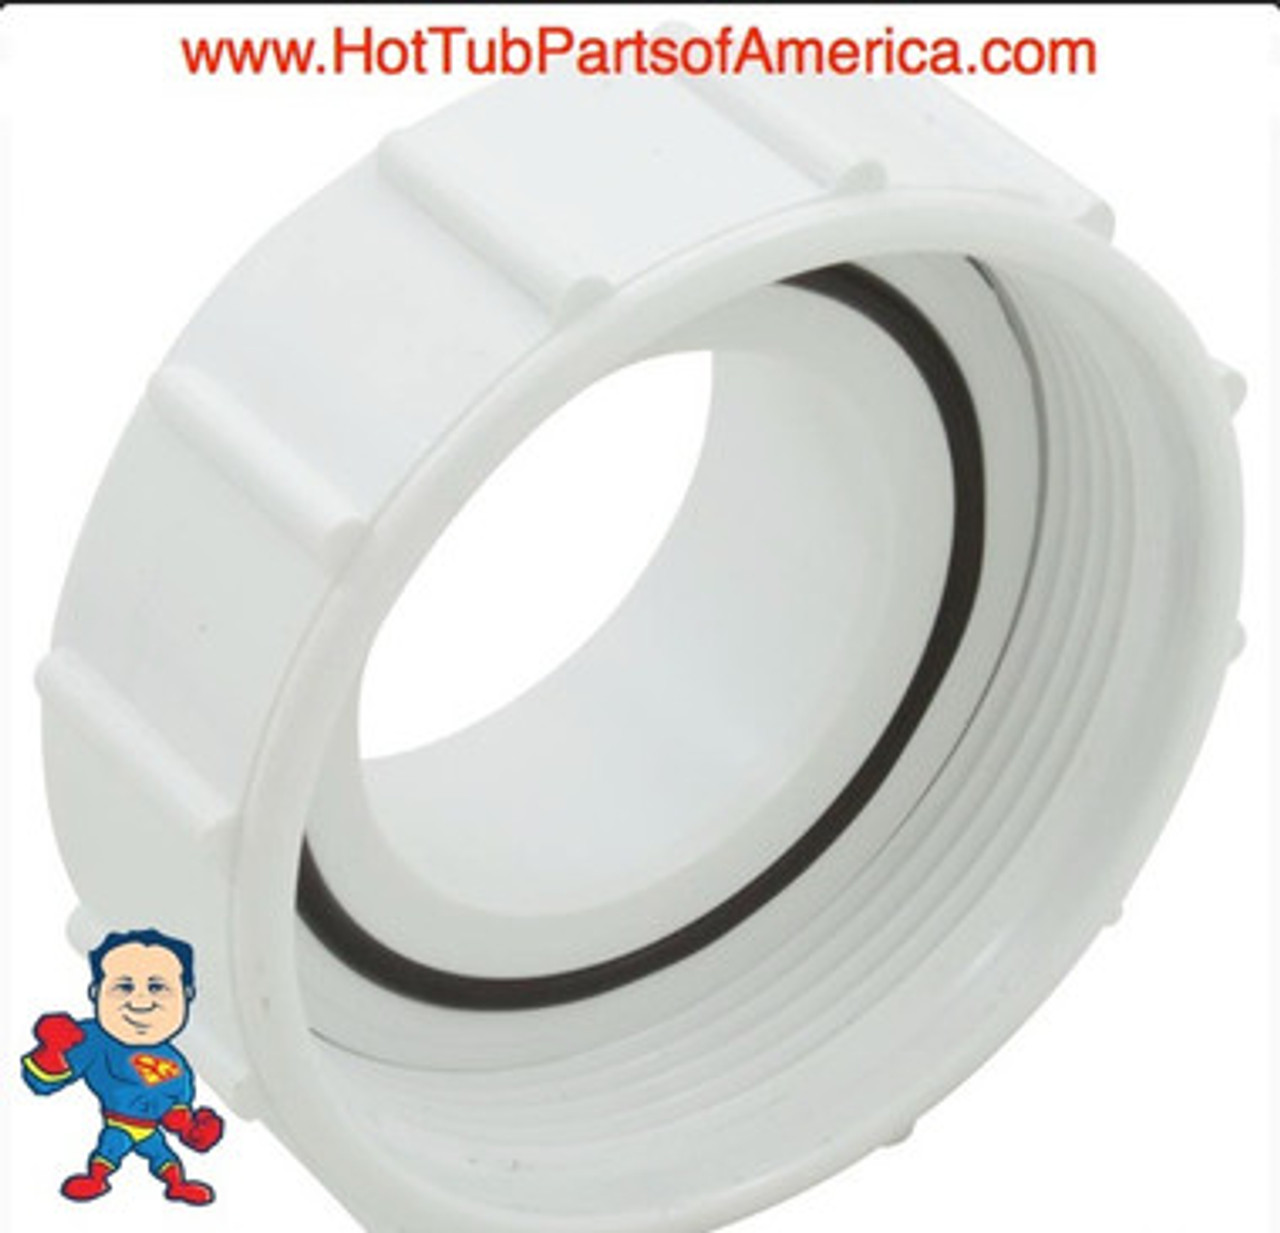 O-Ring for Hot Tub Spa 2 1/2" Pump Union for Viper Xp3 Some Executive
This O-Ring fits a Pump Union that looks similar to this...